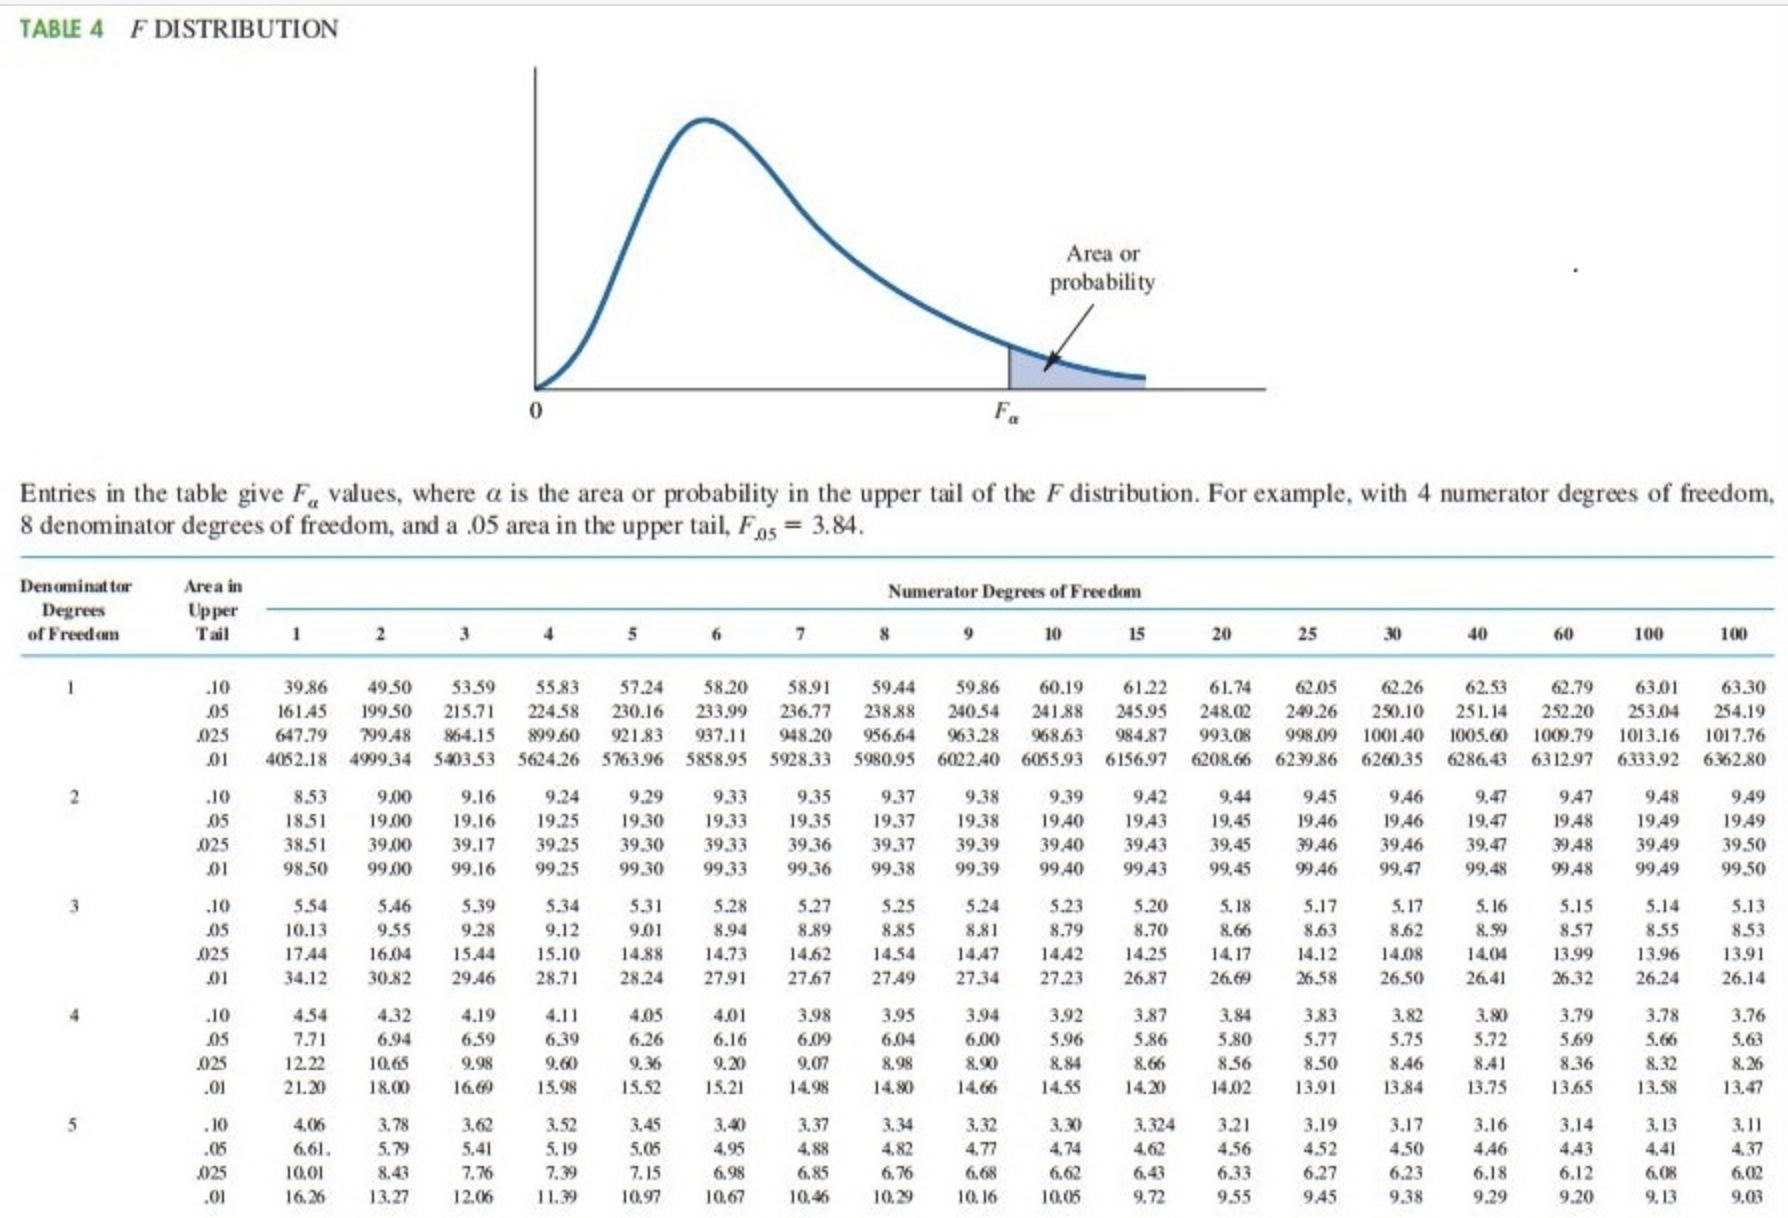 TABLE 4
F DISTRIBUTION
Area or
probability
Entries in the table give F values where α 1s the area or probability in the upper tail of the F distribution. For example, with 4 numerator degrees of freedom.
8 denominator degrees of freedom, and a .05 area in the upper til, Fs 3.84.
Denominat tor
Degrees
of Freedom
Numerator Degrees of Freedom
Tai
15
10
60
100
9864950 5359 55.83 57.24 58.20 58.9 5944 5986 60.19 61.22 61.74 62.05 62.26 62.53 62.79 630 63.30
161.45 199.50 215.71 224.58 230.16 233.99 236.77 238.88 240.54 241.88 245.95 248.02 2匉.26 250.10 251.14 252.20 253.04 254.19
025 647.79 9948 64.15 89960 92183 37.948.20 95664 963.28 96863 98487 993.08 998.09 100140 1005.60 1009.79 1013.16 1017.76
01 4052.18 4999.34 5903.53 5624.26 5763.96 5858.95 5928.33 5980.95 6022.40 6055.93 6156.97 6208.66 6239.86 626035 6286.43 6312.97 6333.92 636280
9.38
949
1851 19.00 9.16 19.25 1930 19.33 19.35 19.37 19.38 1940 1943 19,45 1946 1946 19,47 1948 1949 1949
385 39.00 39.17 39.25 39.3039.33 39.36 3937 39.39 3940 3943 39,45 3946 3946 39.47 3948 3949 3950
98.50 99.00 99.16 99.25 99.30 9933 99.36 99.38 99.39 9940 9943 99.45 9946 99.47 99.48 9948 9949 99.50
8.53
9.00
9.29
9.37
9.39
942
946
948
9.24
9.35
945
947
025
5.39
9.28
5.28
8.94
5.27
8.89
5.24
5.23
8.79
5.20
8.70
5.18
10.13
1744 1604 5.44 5.10 1488 14.7314.62 14.54 14.47 442 14.251417 4.12 1408 14.04 13.99 13.96 13.91
34.12 3082 2946 28.71 28.24 27.9 277 2749 27.34 27.23 2687 2669 26.58 26.50 26.41 26.32 2624 26.14
8.63
8.62
8.59
8.57
8.55
8.85
4.54
7.7
3.98
609
3.95
6.04
3.94
6.00
8.90
3.92
5.96
3.83
3.79
569
8.36
3.8413.75 1365 13.58 13.47
3.78
5.66
3.76
5.72
5.80
8.56
6.26
5.75
6.94
12.22 105
6.59
5.86
8.50
21.20 18.00 1669 15.98 5.52 5. 4.98 14.80 14.66 14.55 4.20 14.02 3.91
01
i0
05
3.324 3.21
4.56
6.33
9.55
4.52
6.27
945
4.50
6.23
9.38
4.46
443
10.0
6,26 3.27 2.06 39 10.97 1067 1046 09 0,16 10,05
6,76
6,08
9.29
01
9.20
